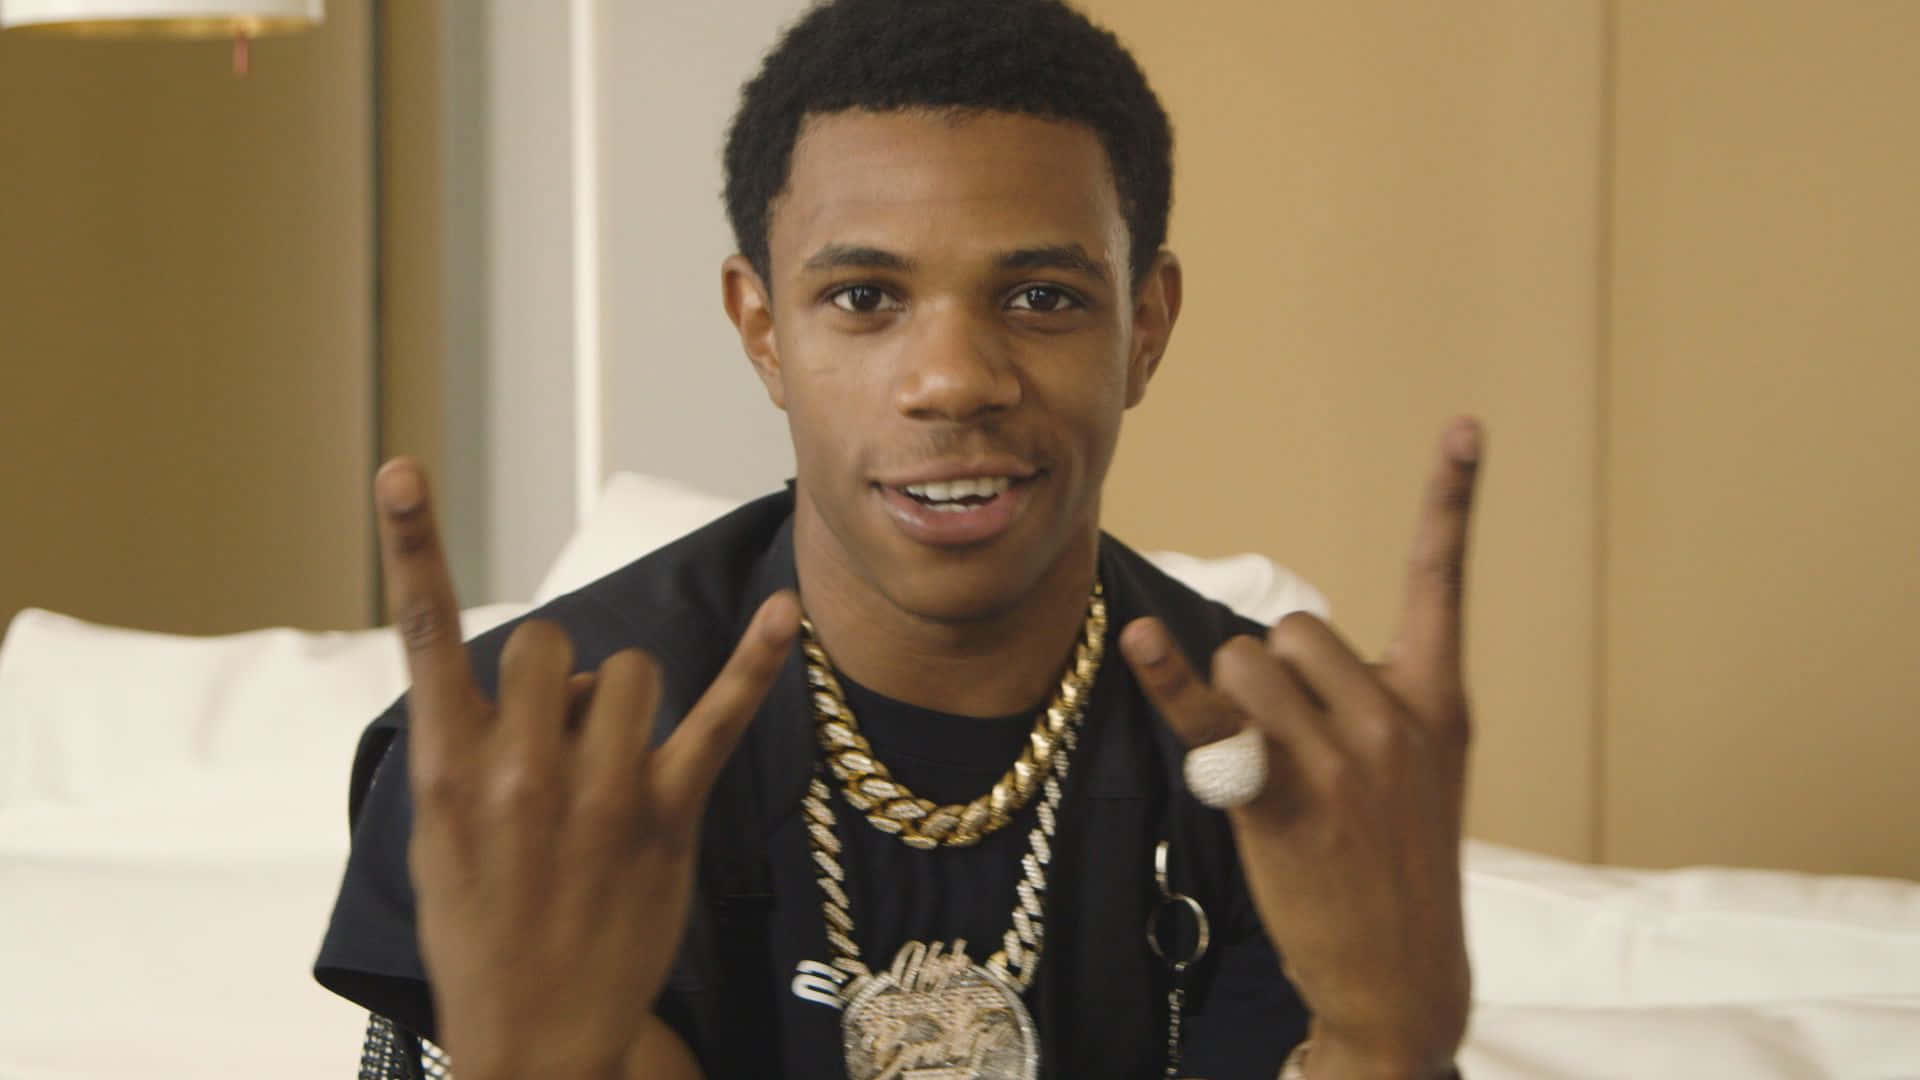 Download A Boogie Wit Da Hoodie captures his dramatic style on stage ...